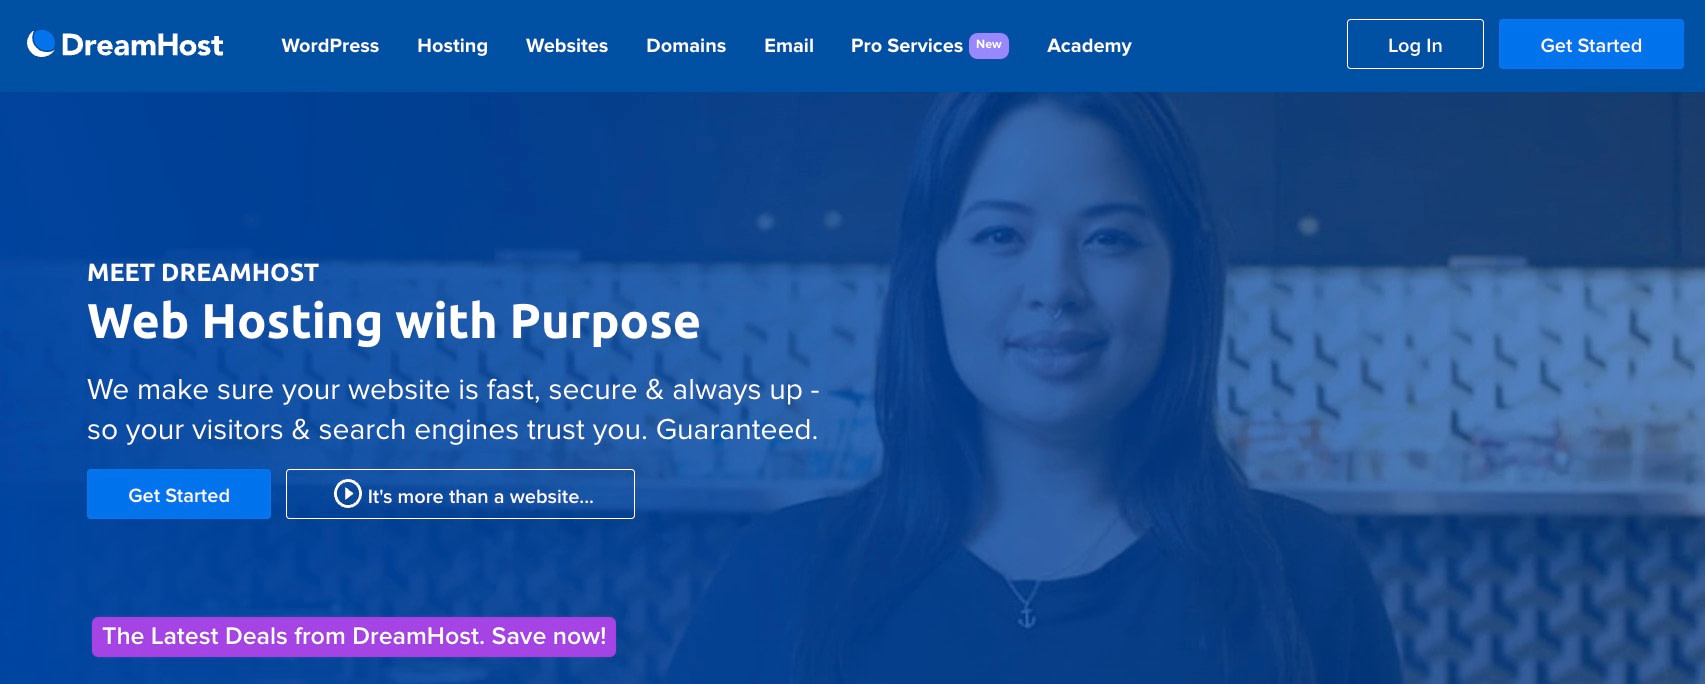 The DreamHost homepage.